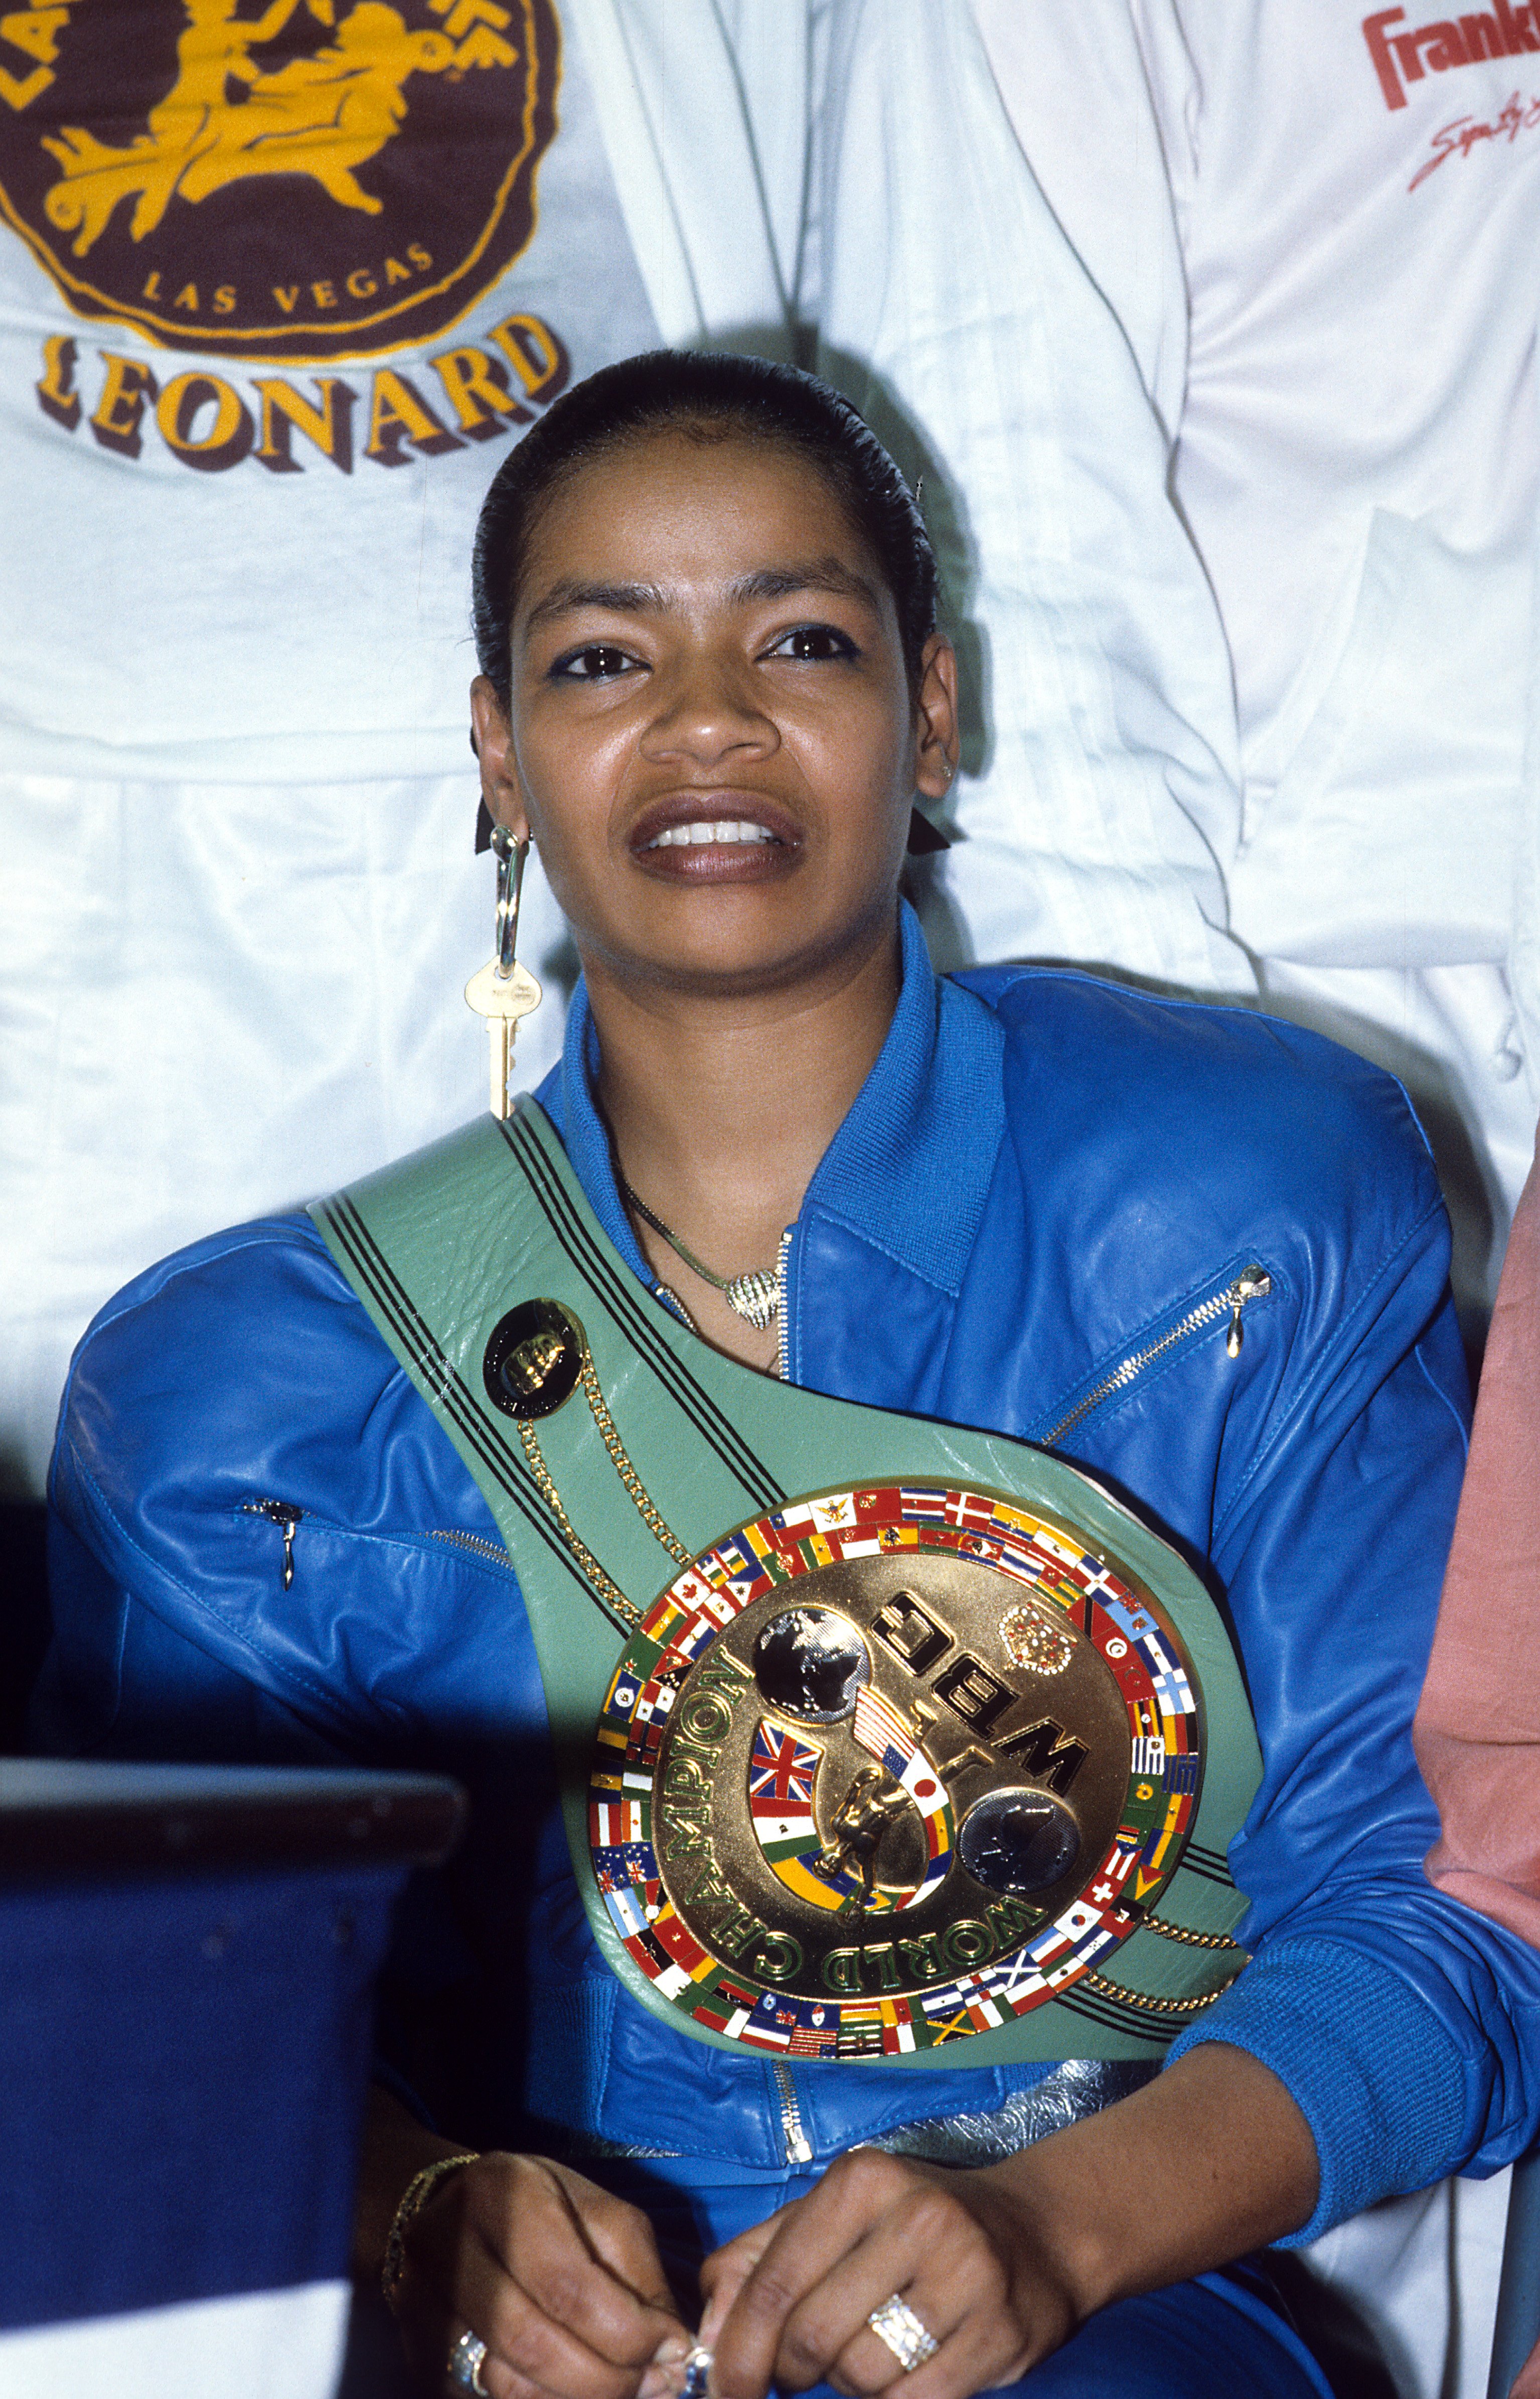 Juanita Wilkinson wears Sugar Ray Leonard's championship belt during a press conference after the fight against Marvin Haglerat at Caesars Palace, on April 6, 1987, in Las Vegas, Nevada. | Source: Getty Images